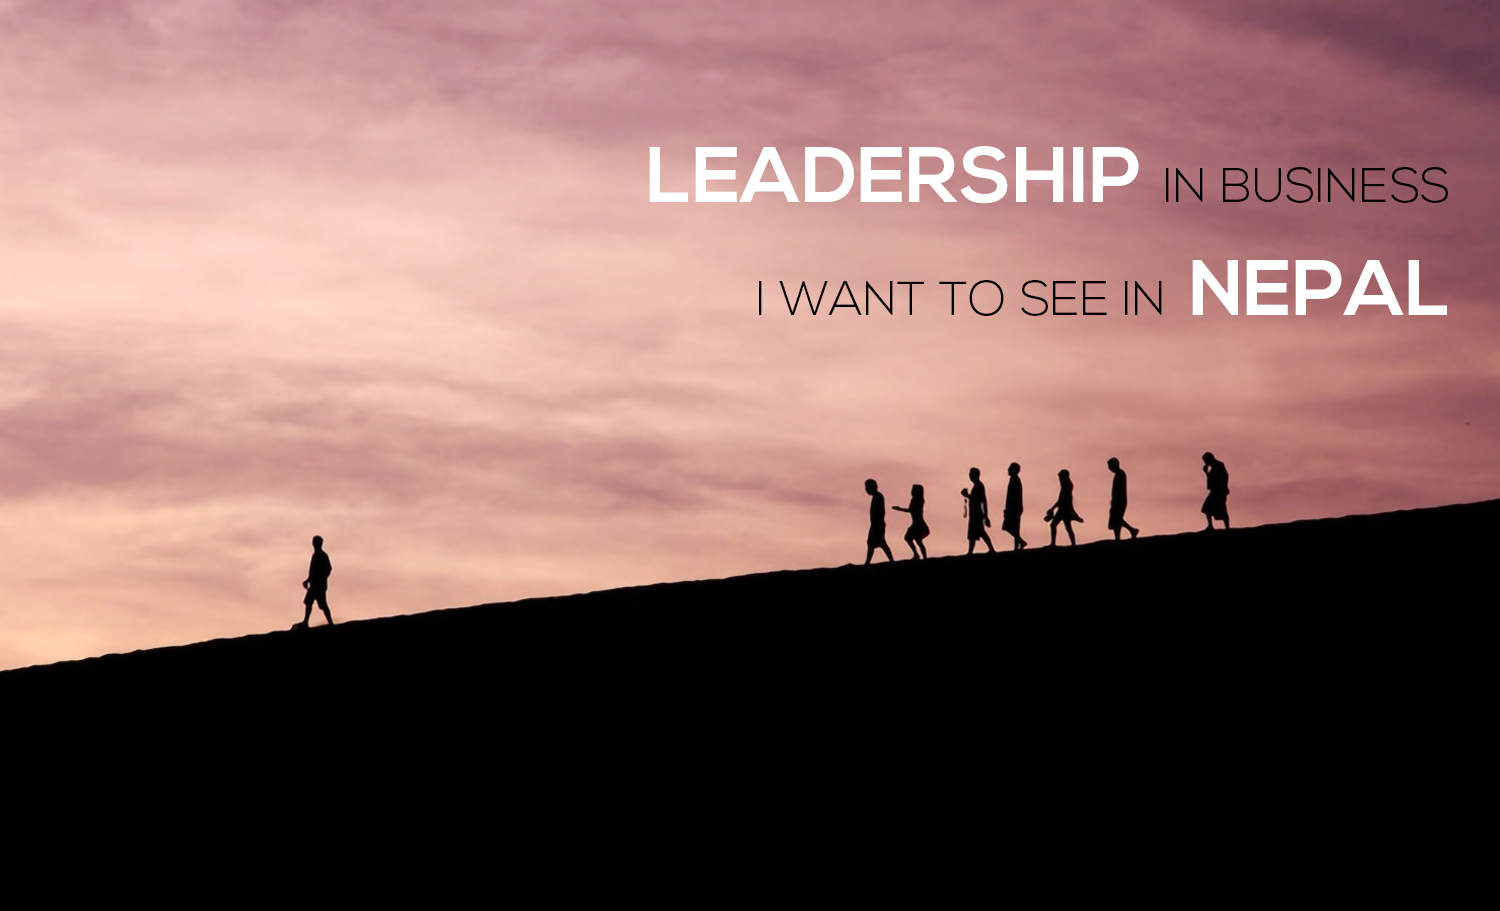 Leadership in business I want to see in Nepal